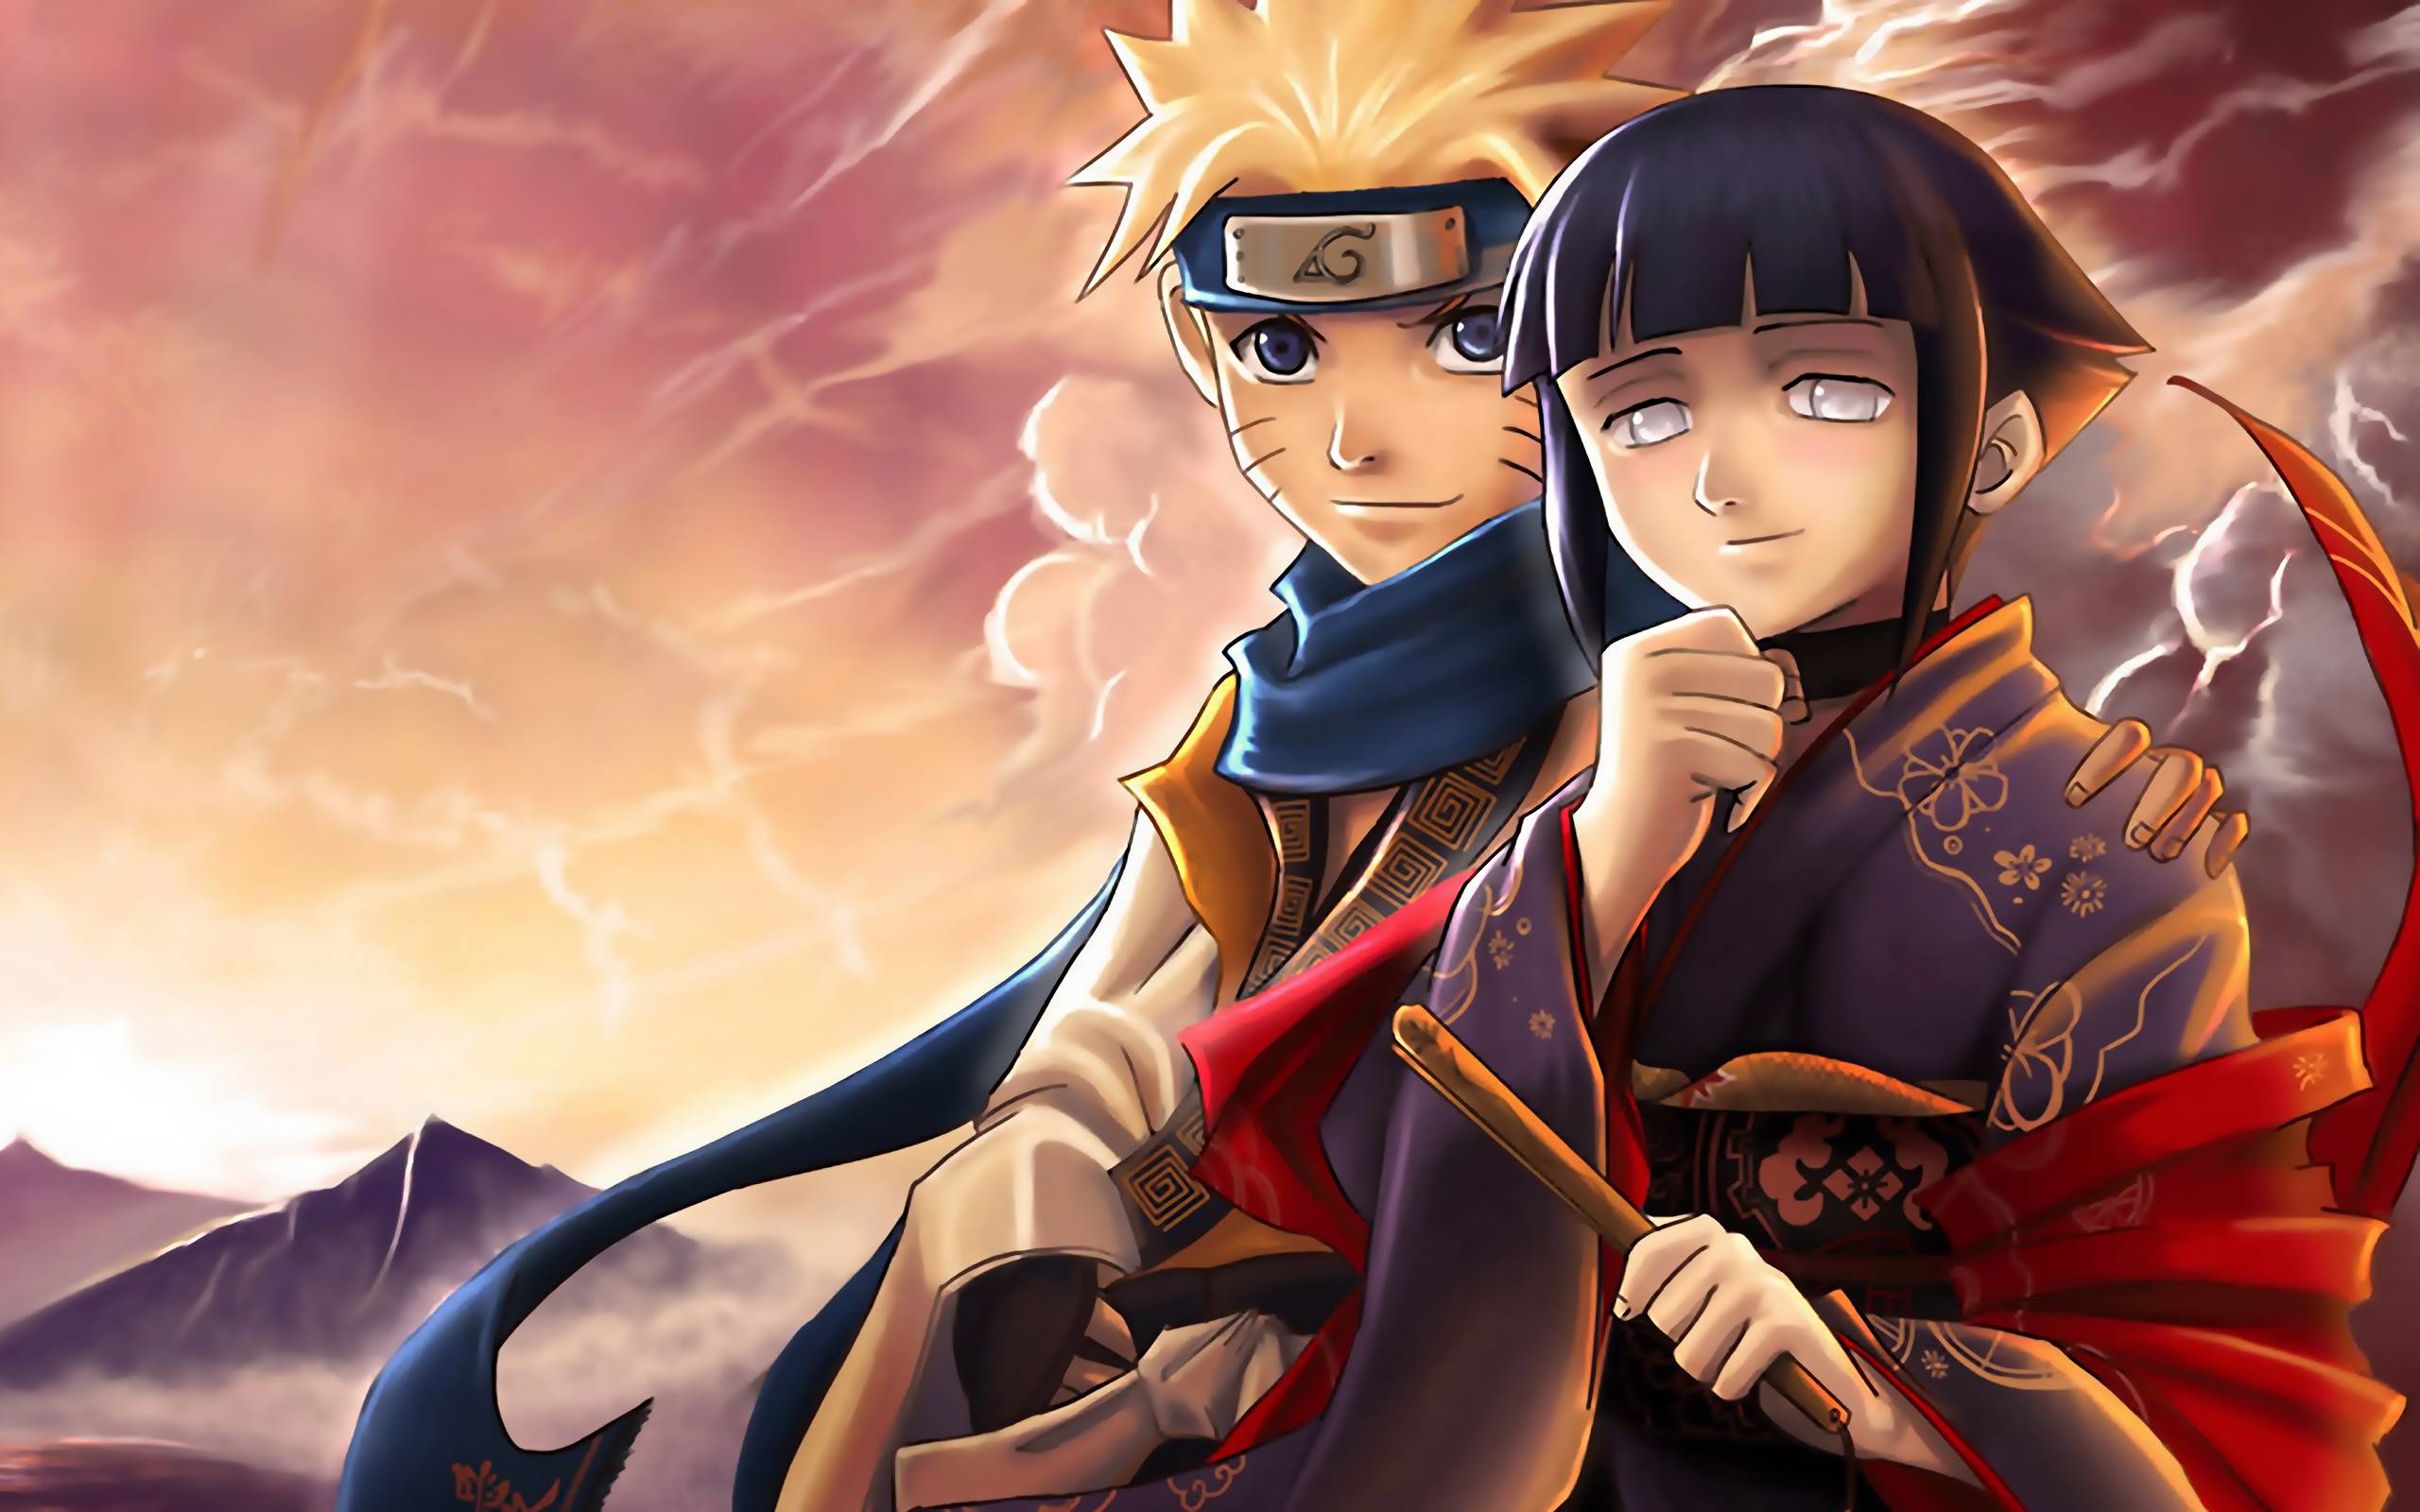 cool wallpapers images photos download Cool Naruto